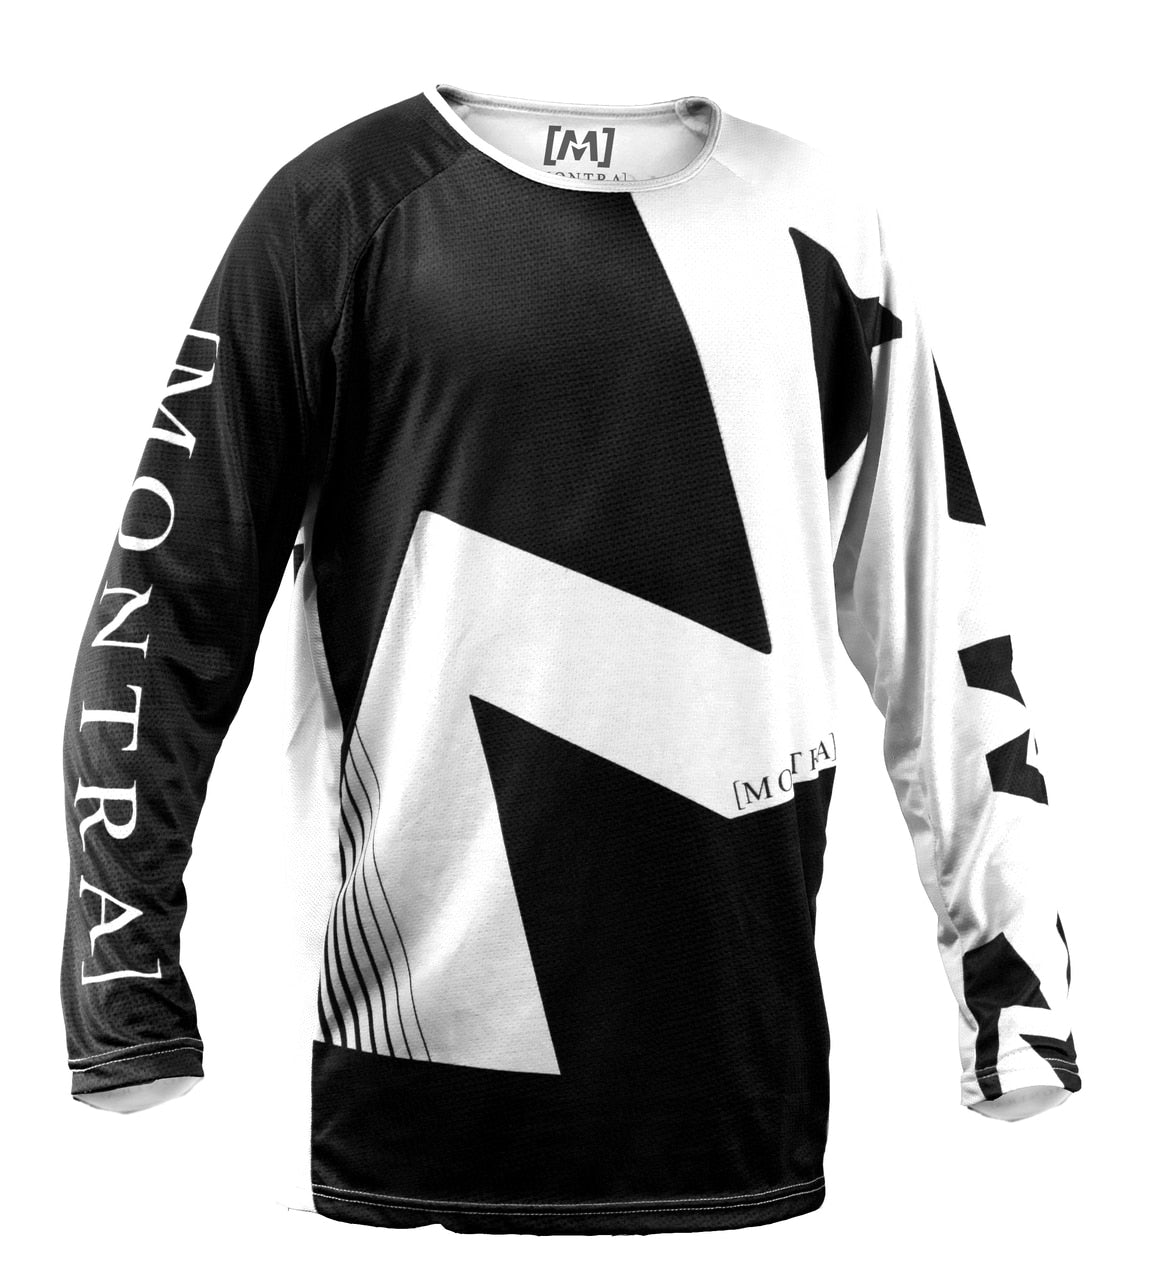 black and white jersey